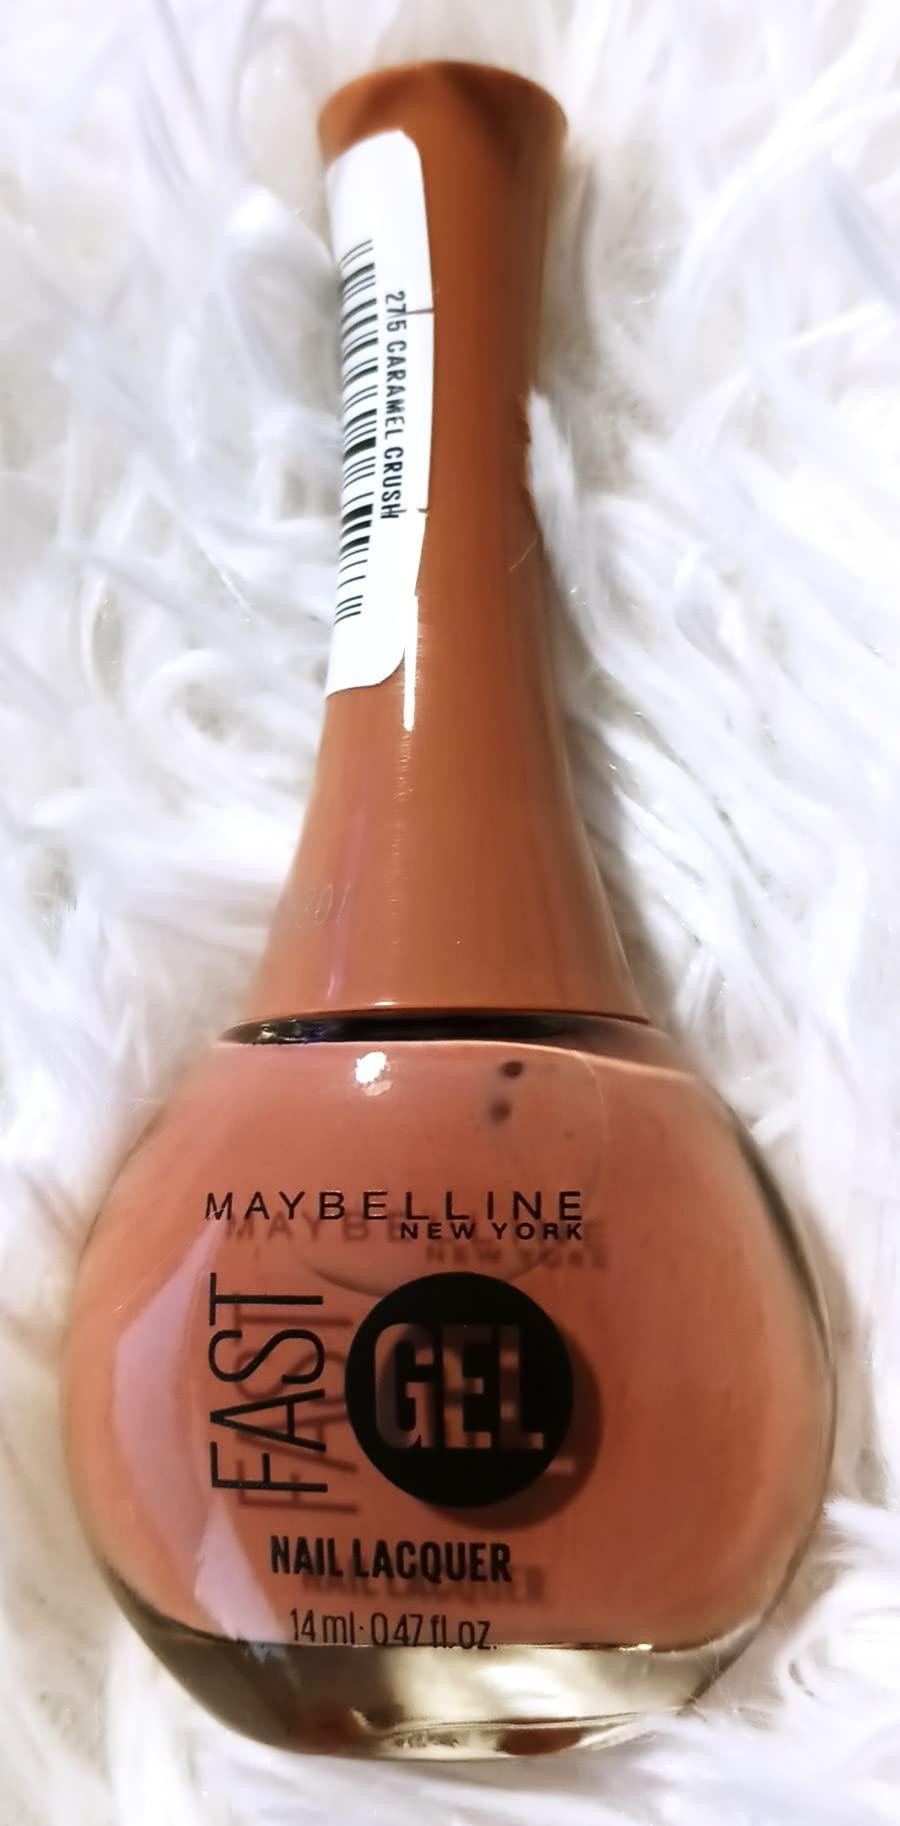 Caramel York Gel Nail Maybelline Fast New Lacquer in Crush